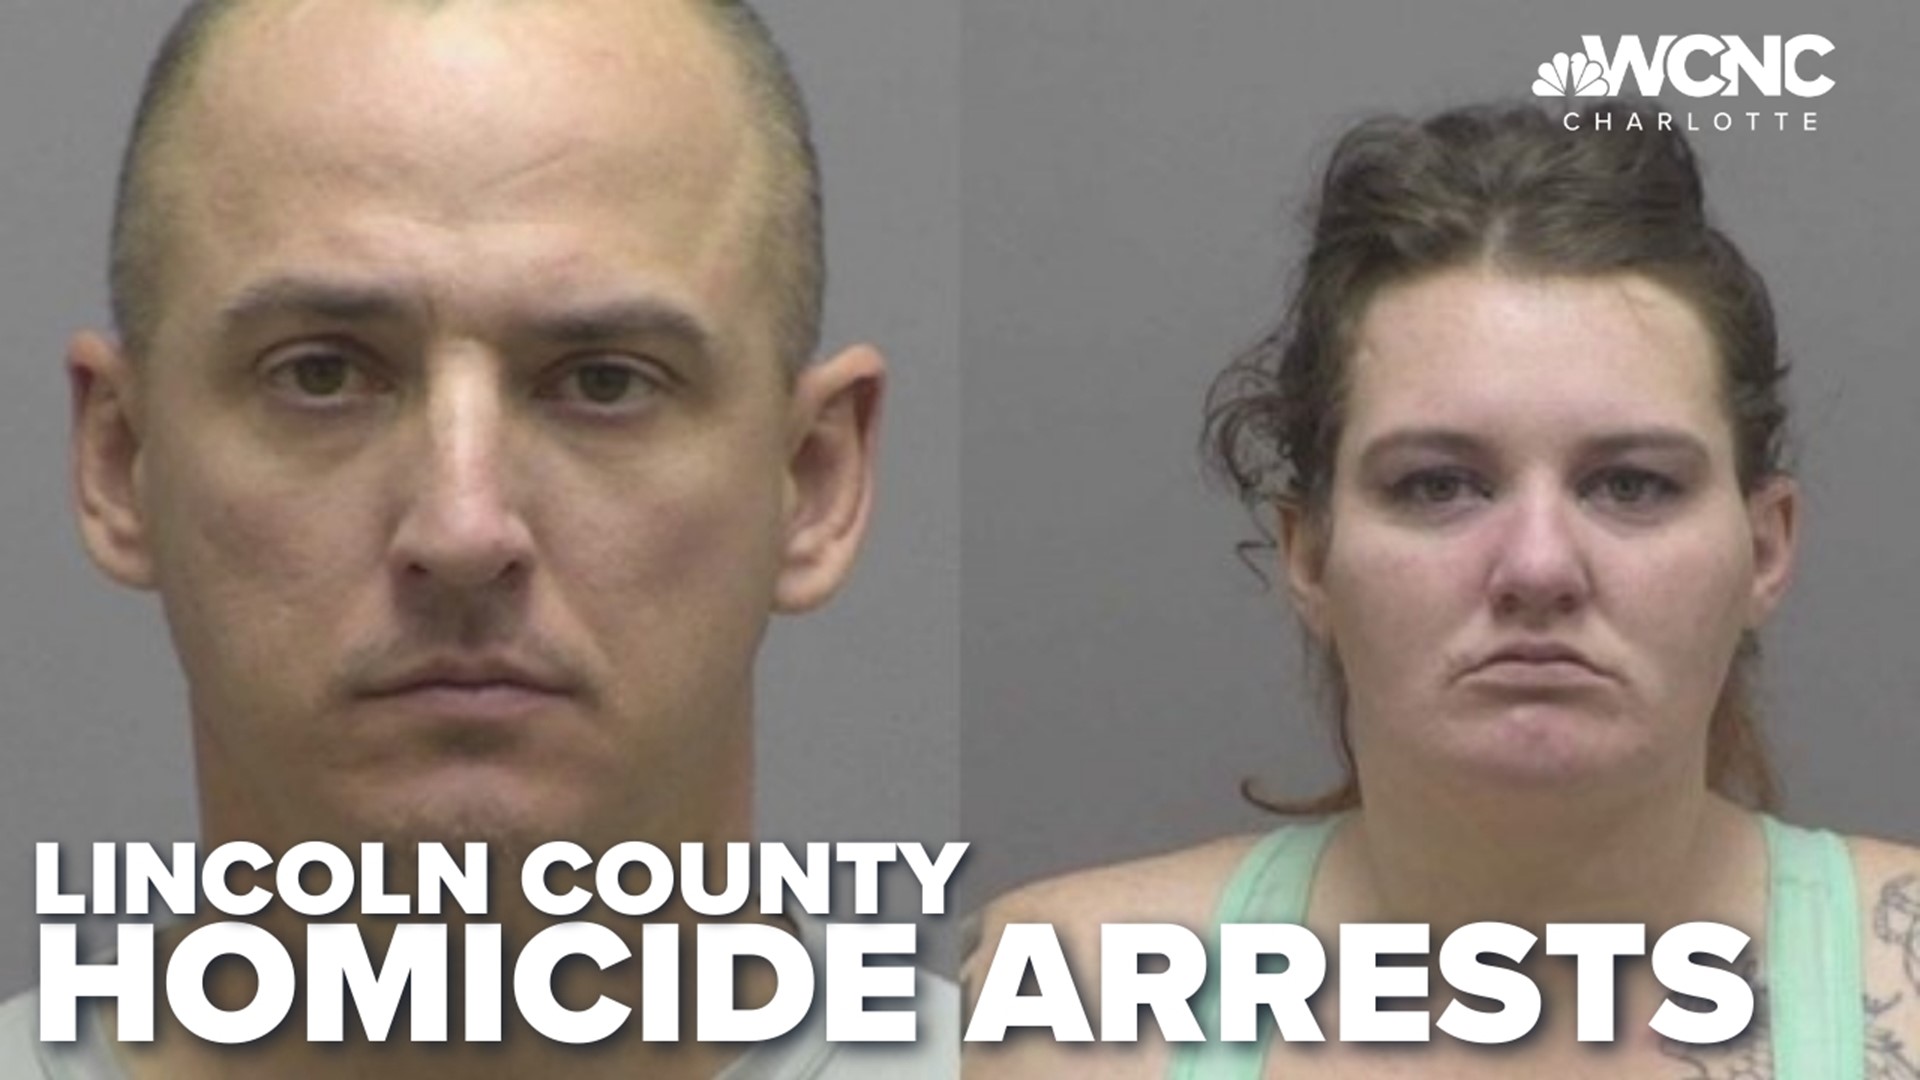 Two people have been charged in connection to the death of a Lincolnton man, whose body was found in a wooded area in 2021, the Lincoln County Sheriff's Office said.